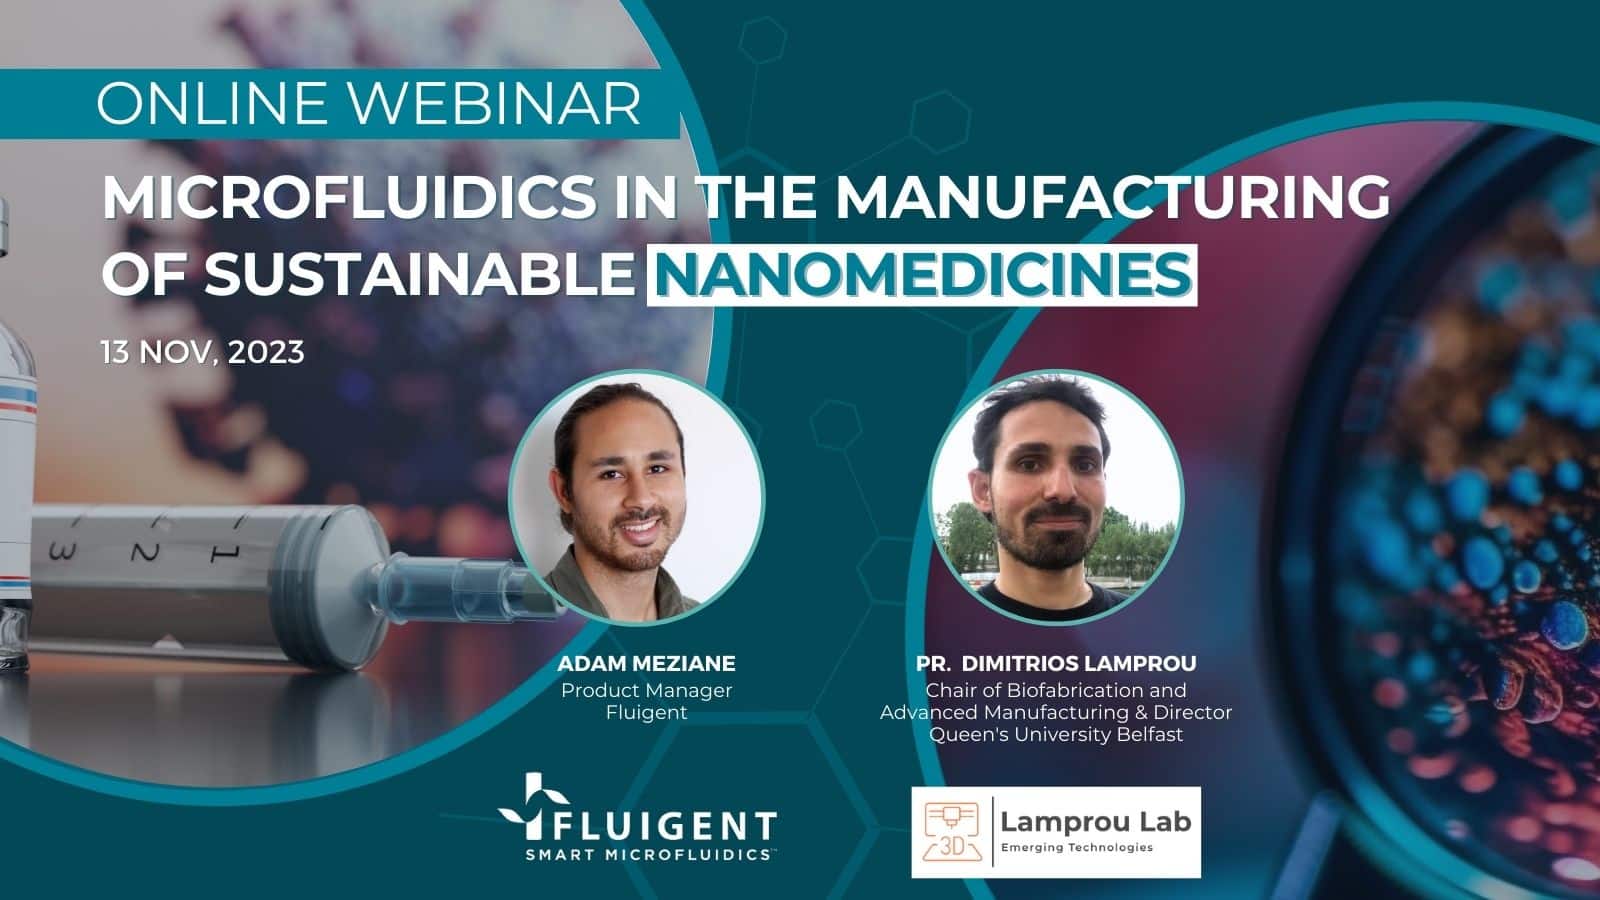 webinar Microfluidics in the manufacturing of sustainable nanomedicines 2023